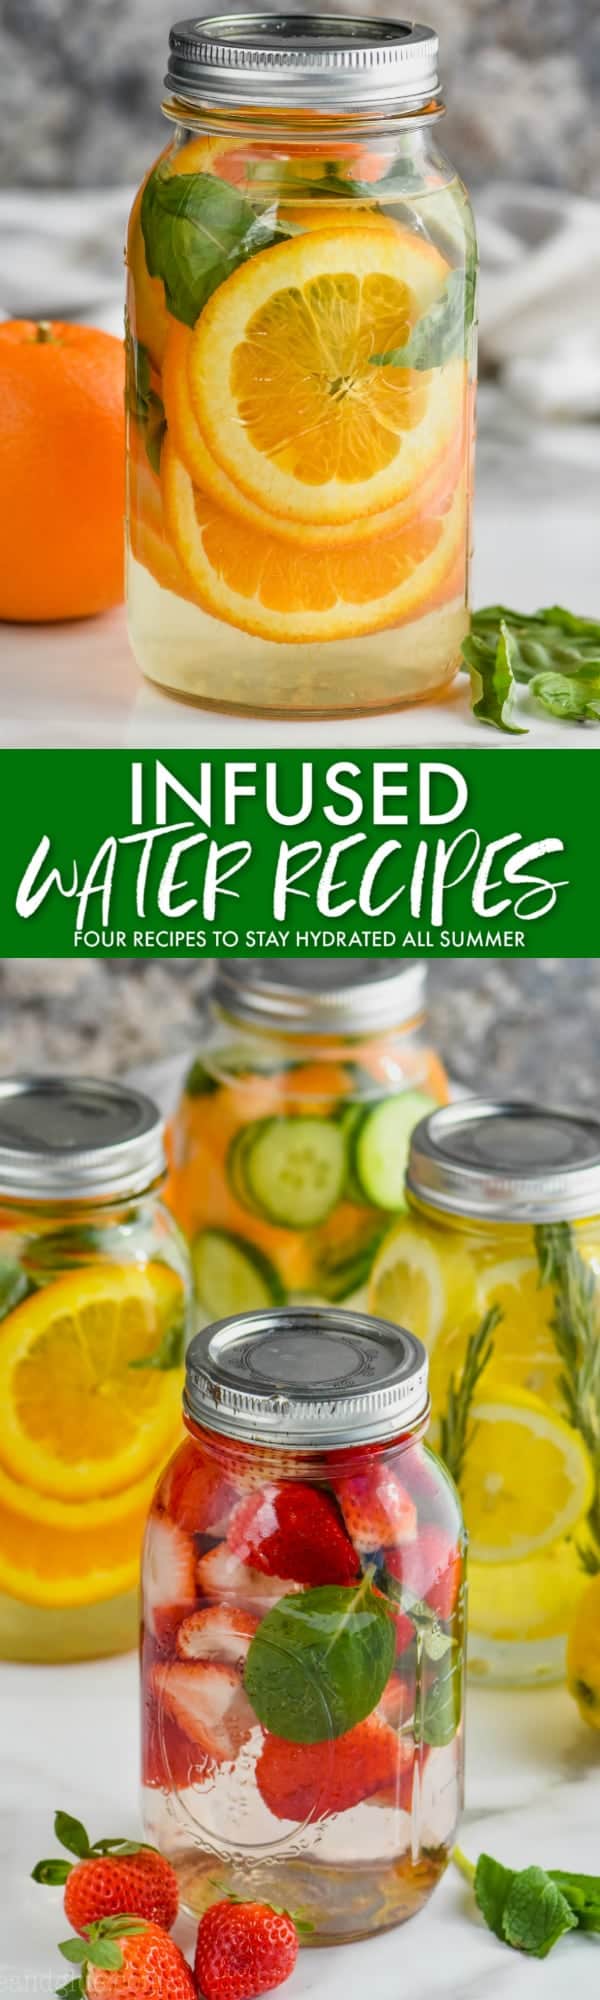 collage of infused water recipes